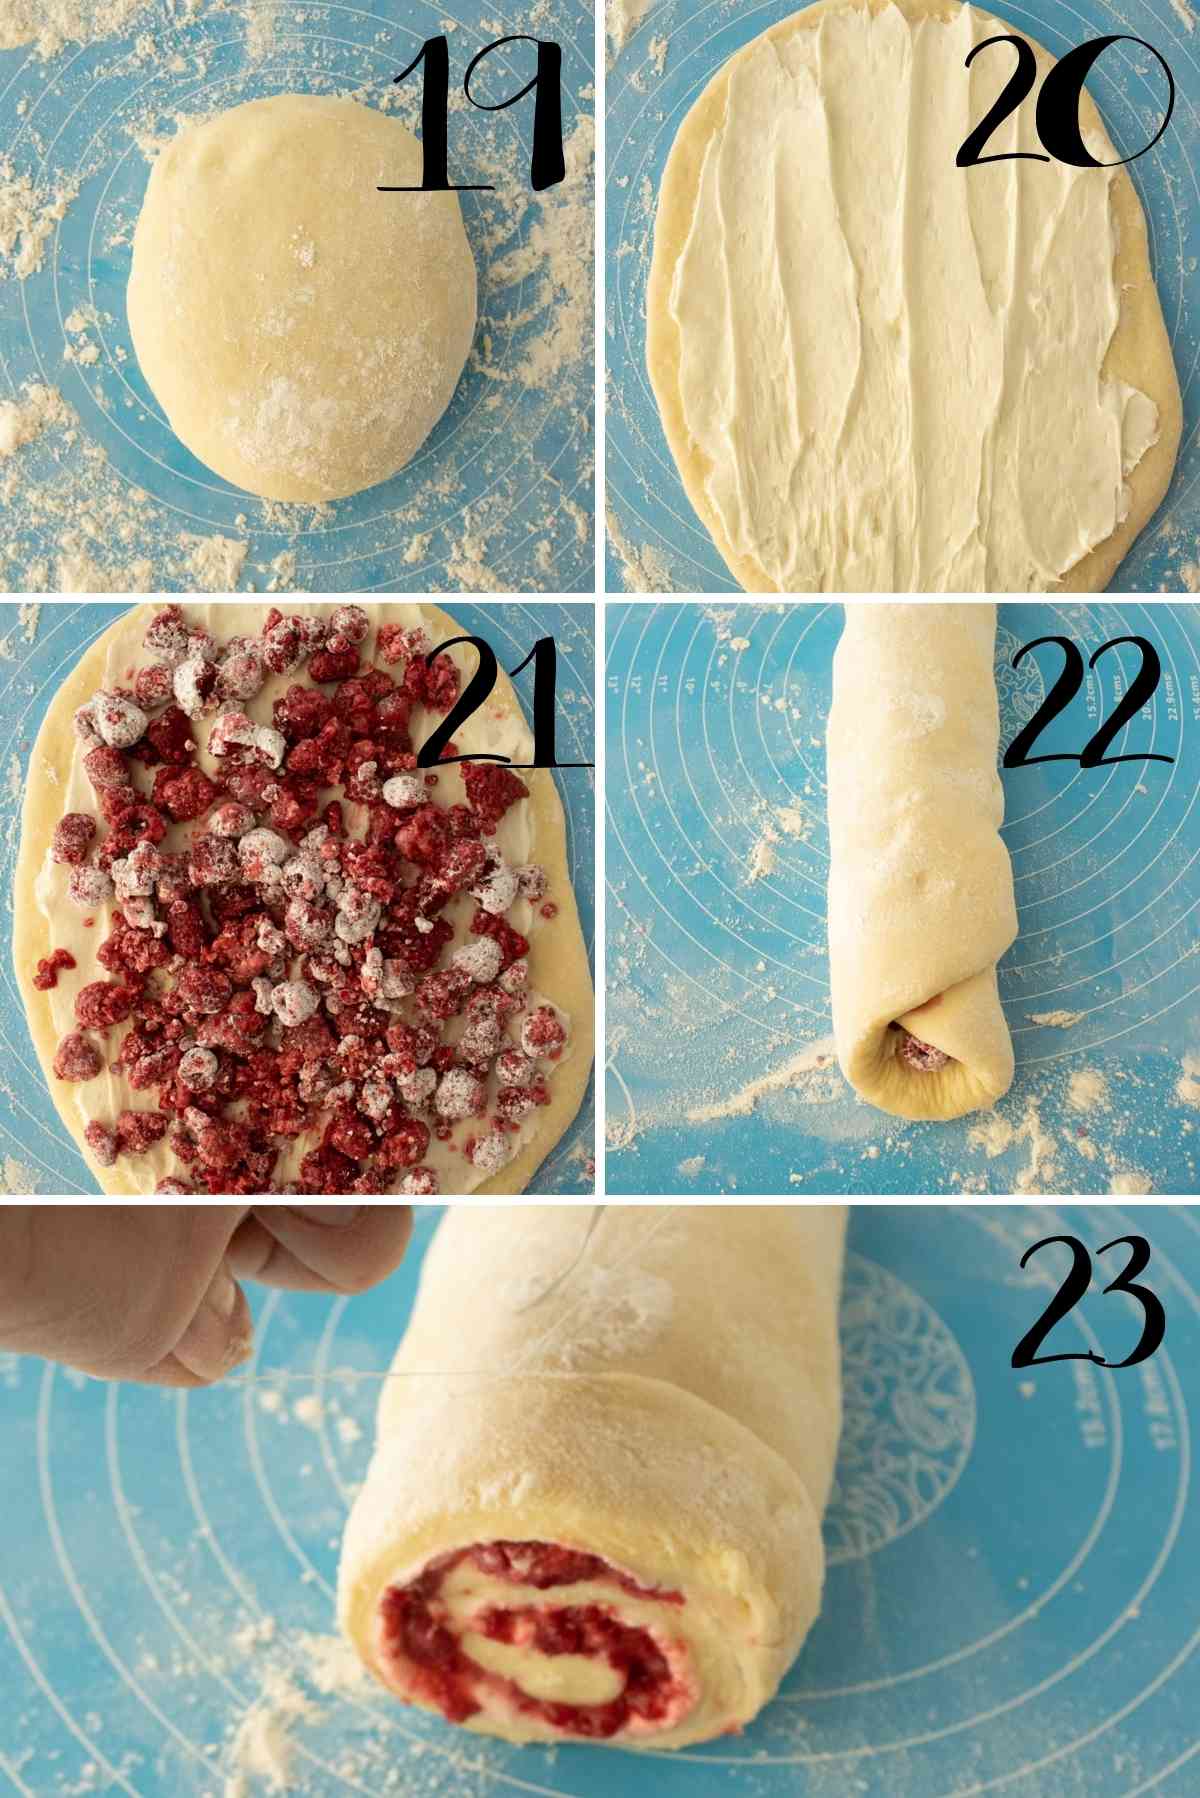 Roll the sweet raspberry filing up in the soft dough.